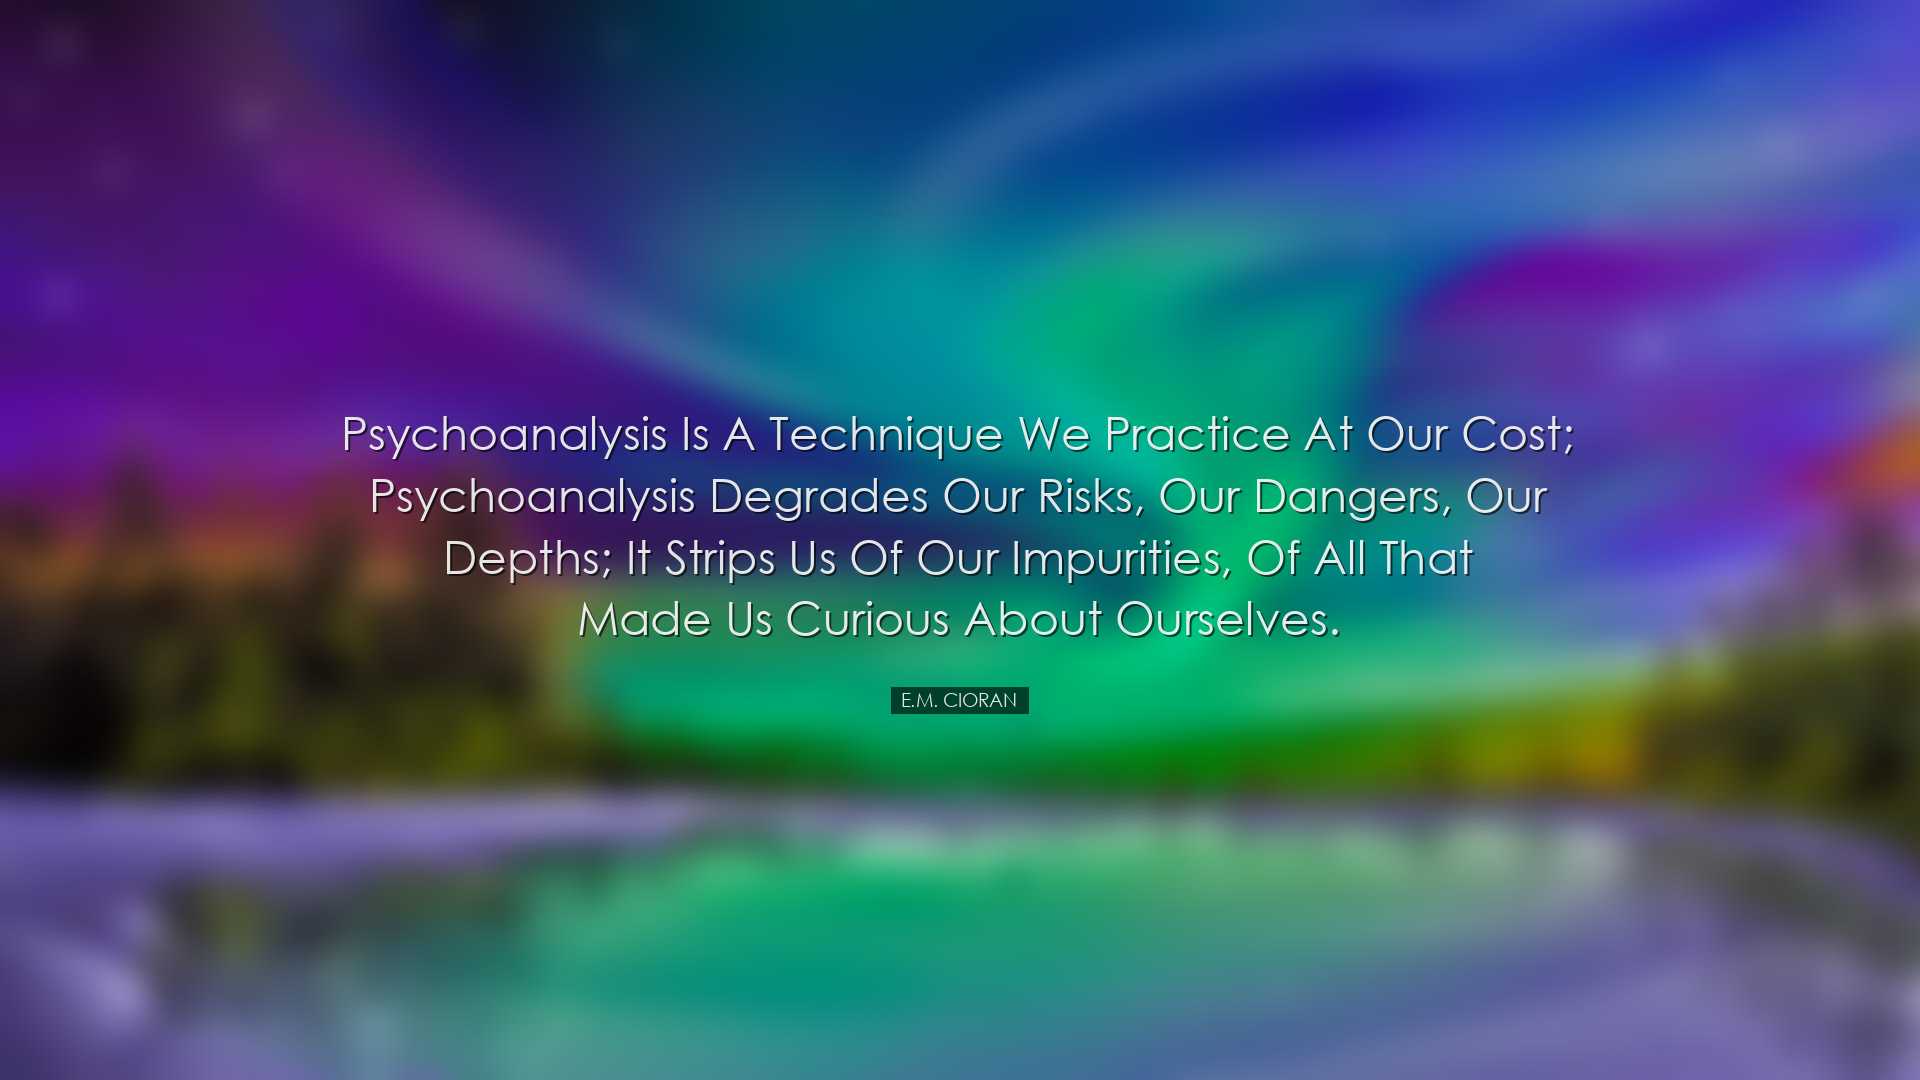 Psychoanalysis is a technique we practice at our cost; psychoanaly